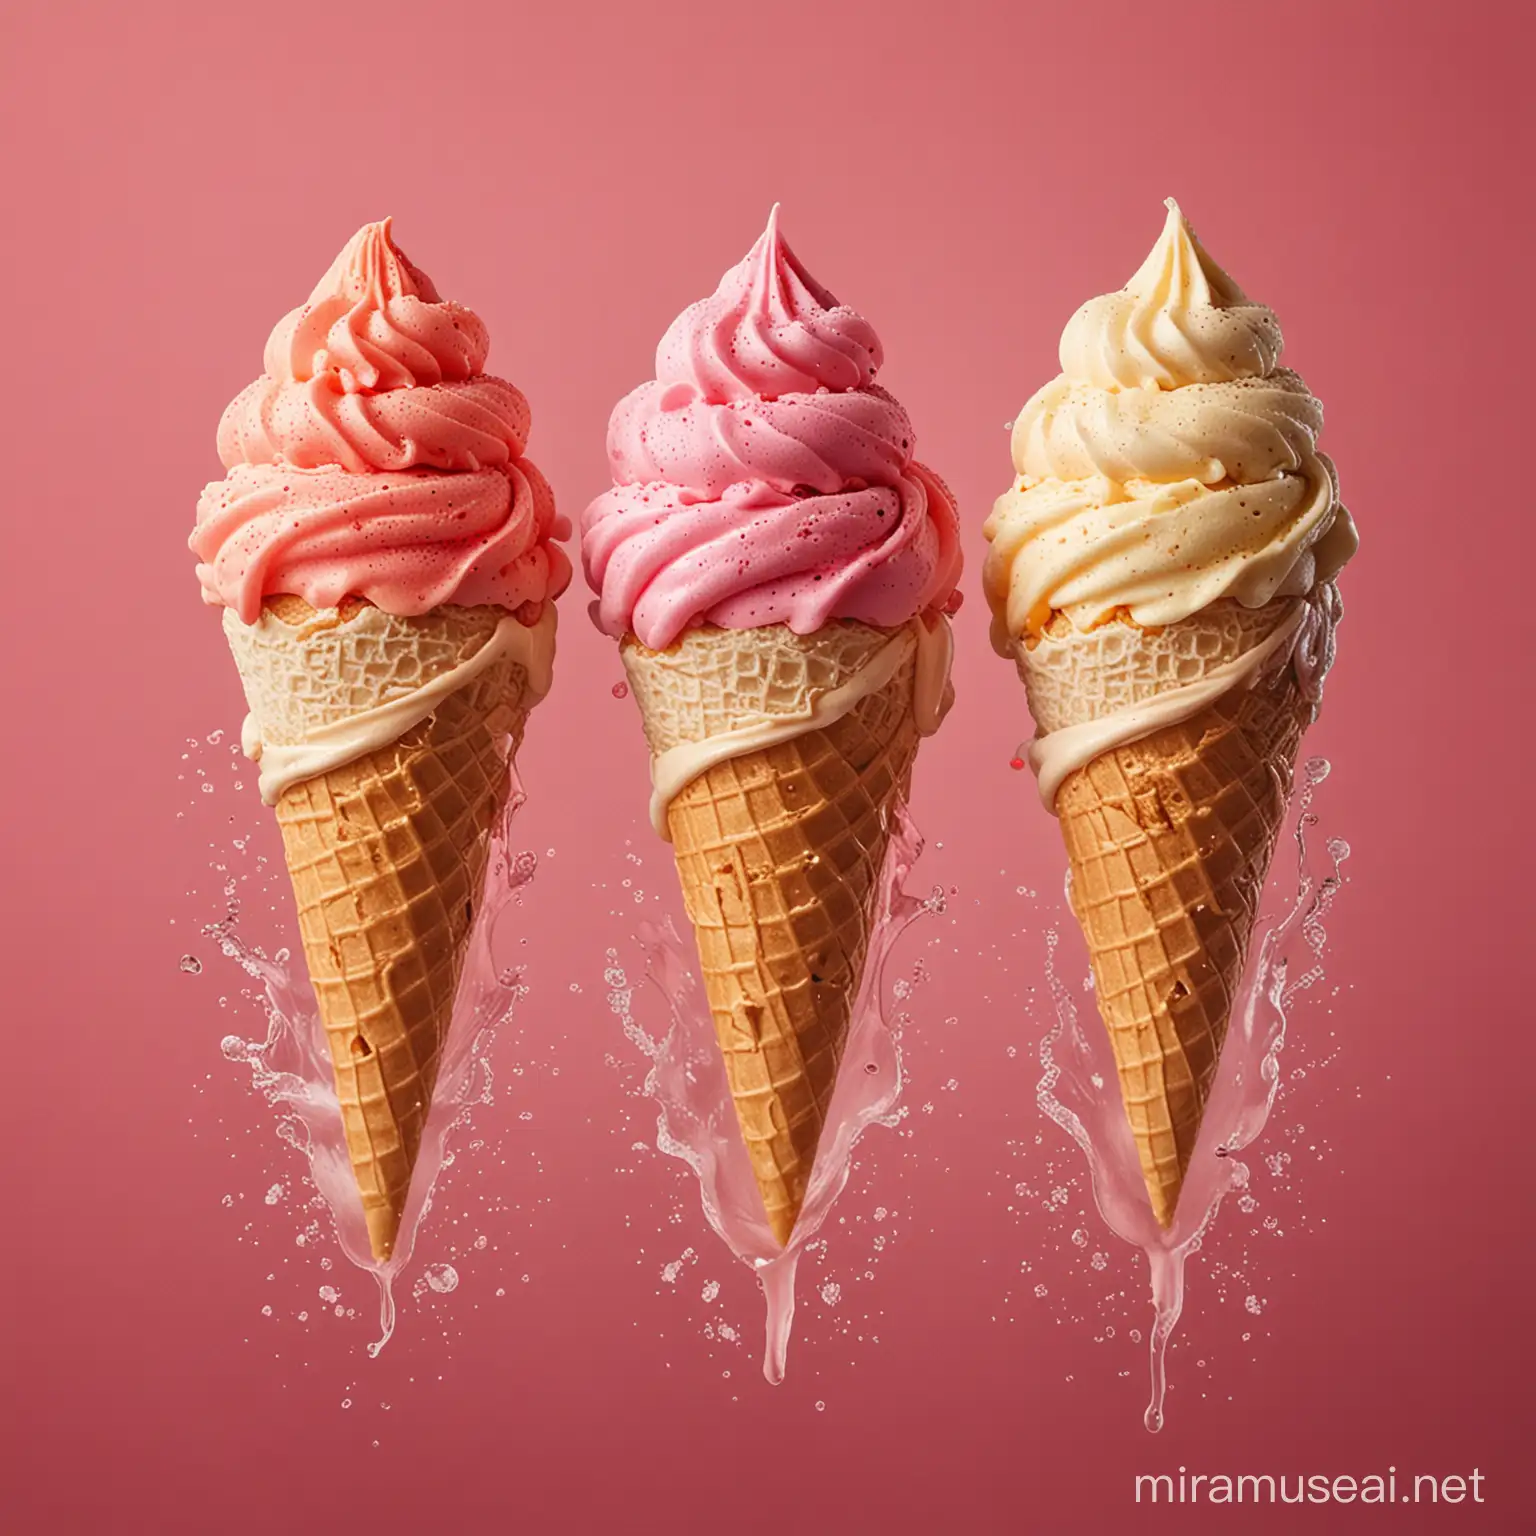 Vibrant Twisted Ice Cream Flavors on Red Background Studio Teaser for New Flavors